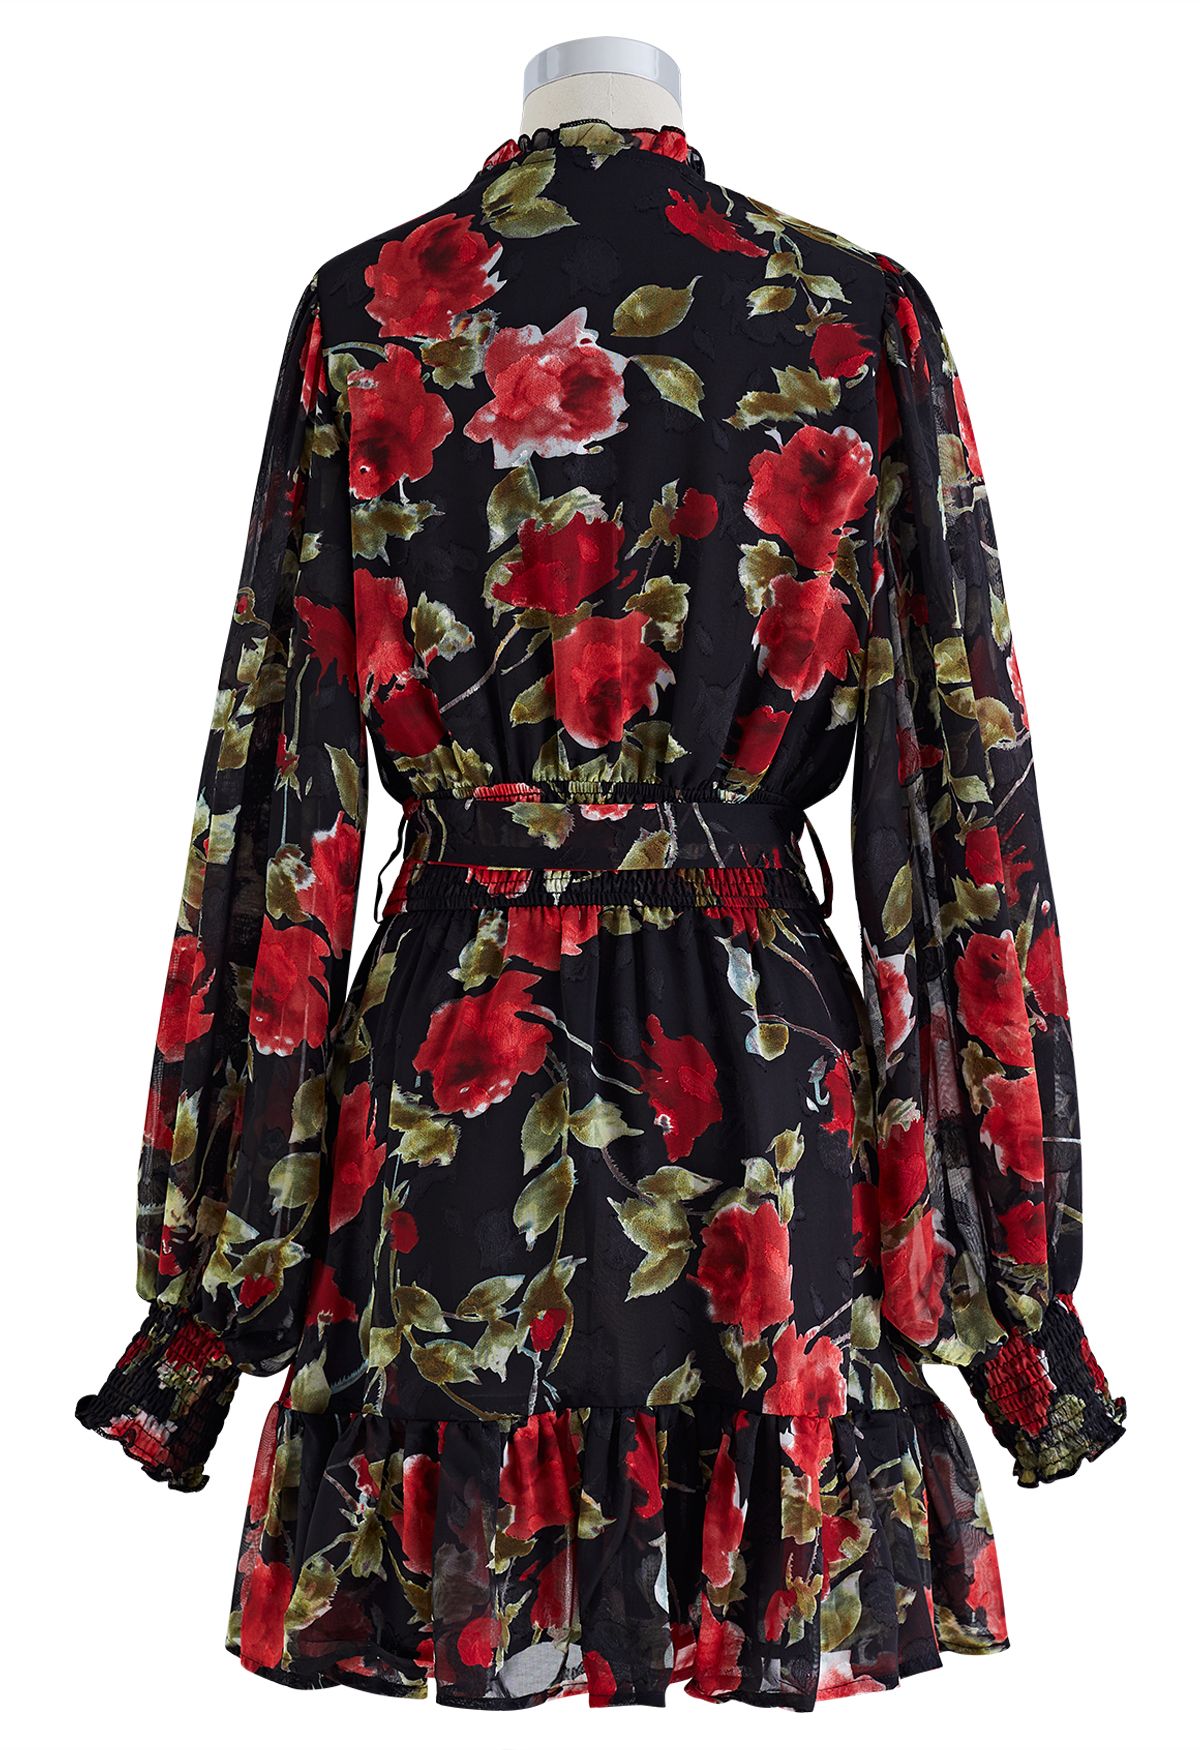 Floral Jacquard Ruffle Buttoned Chiffon Dress in Black - Retro, Indie ...